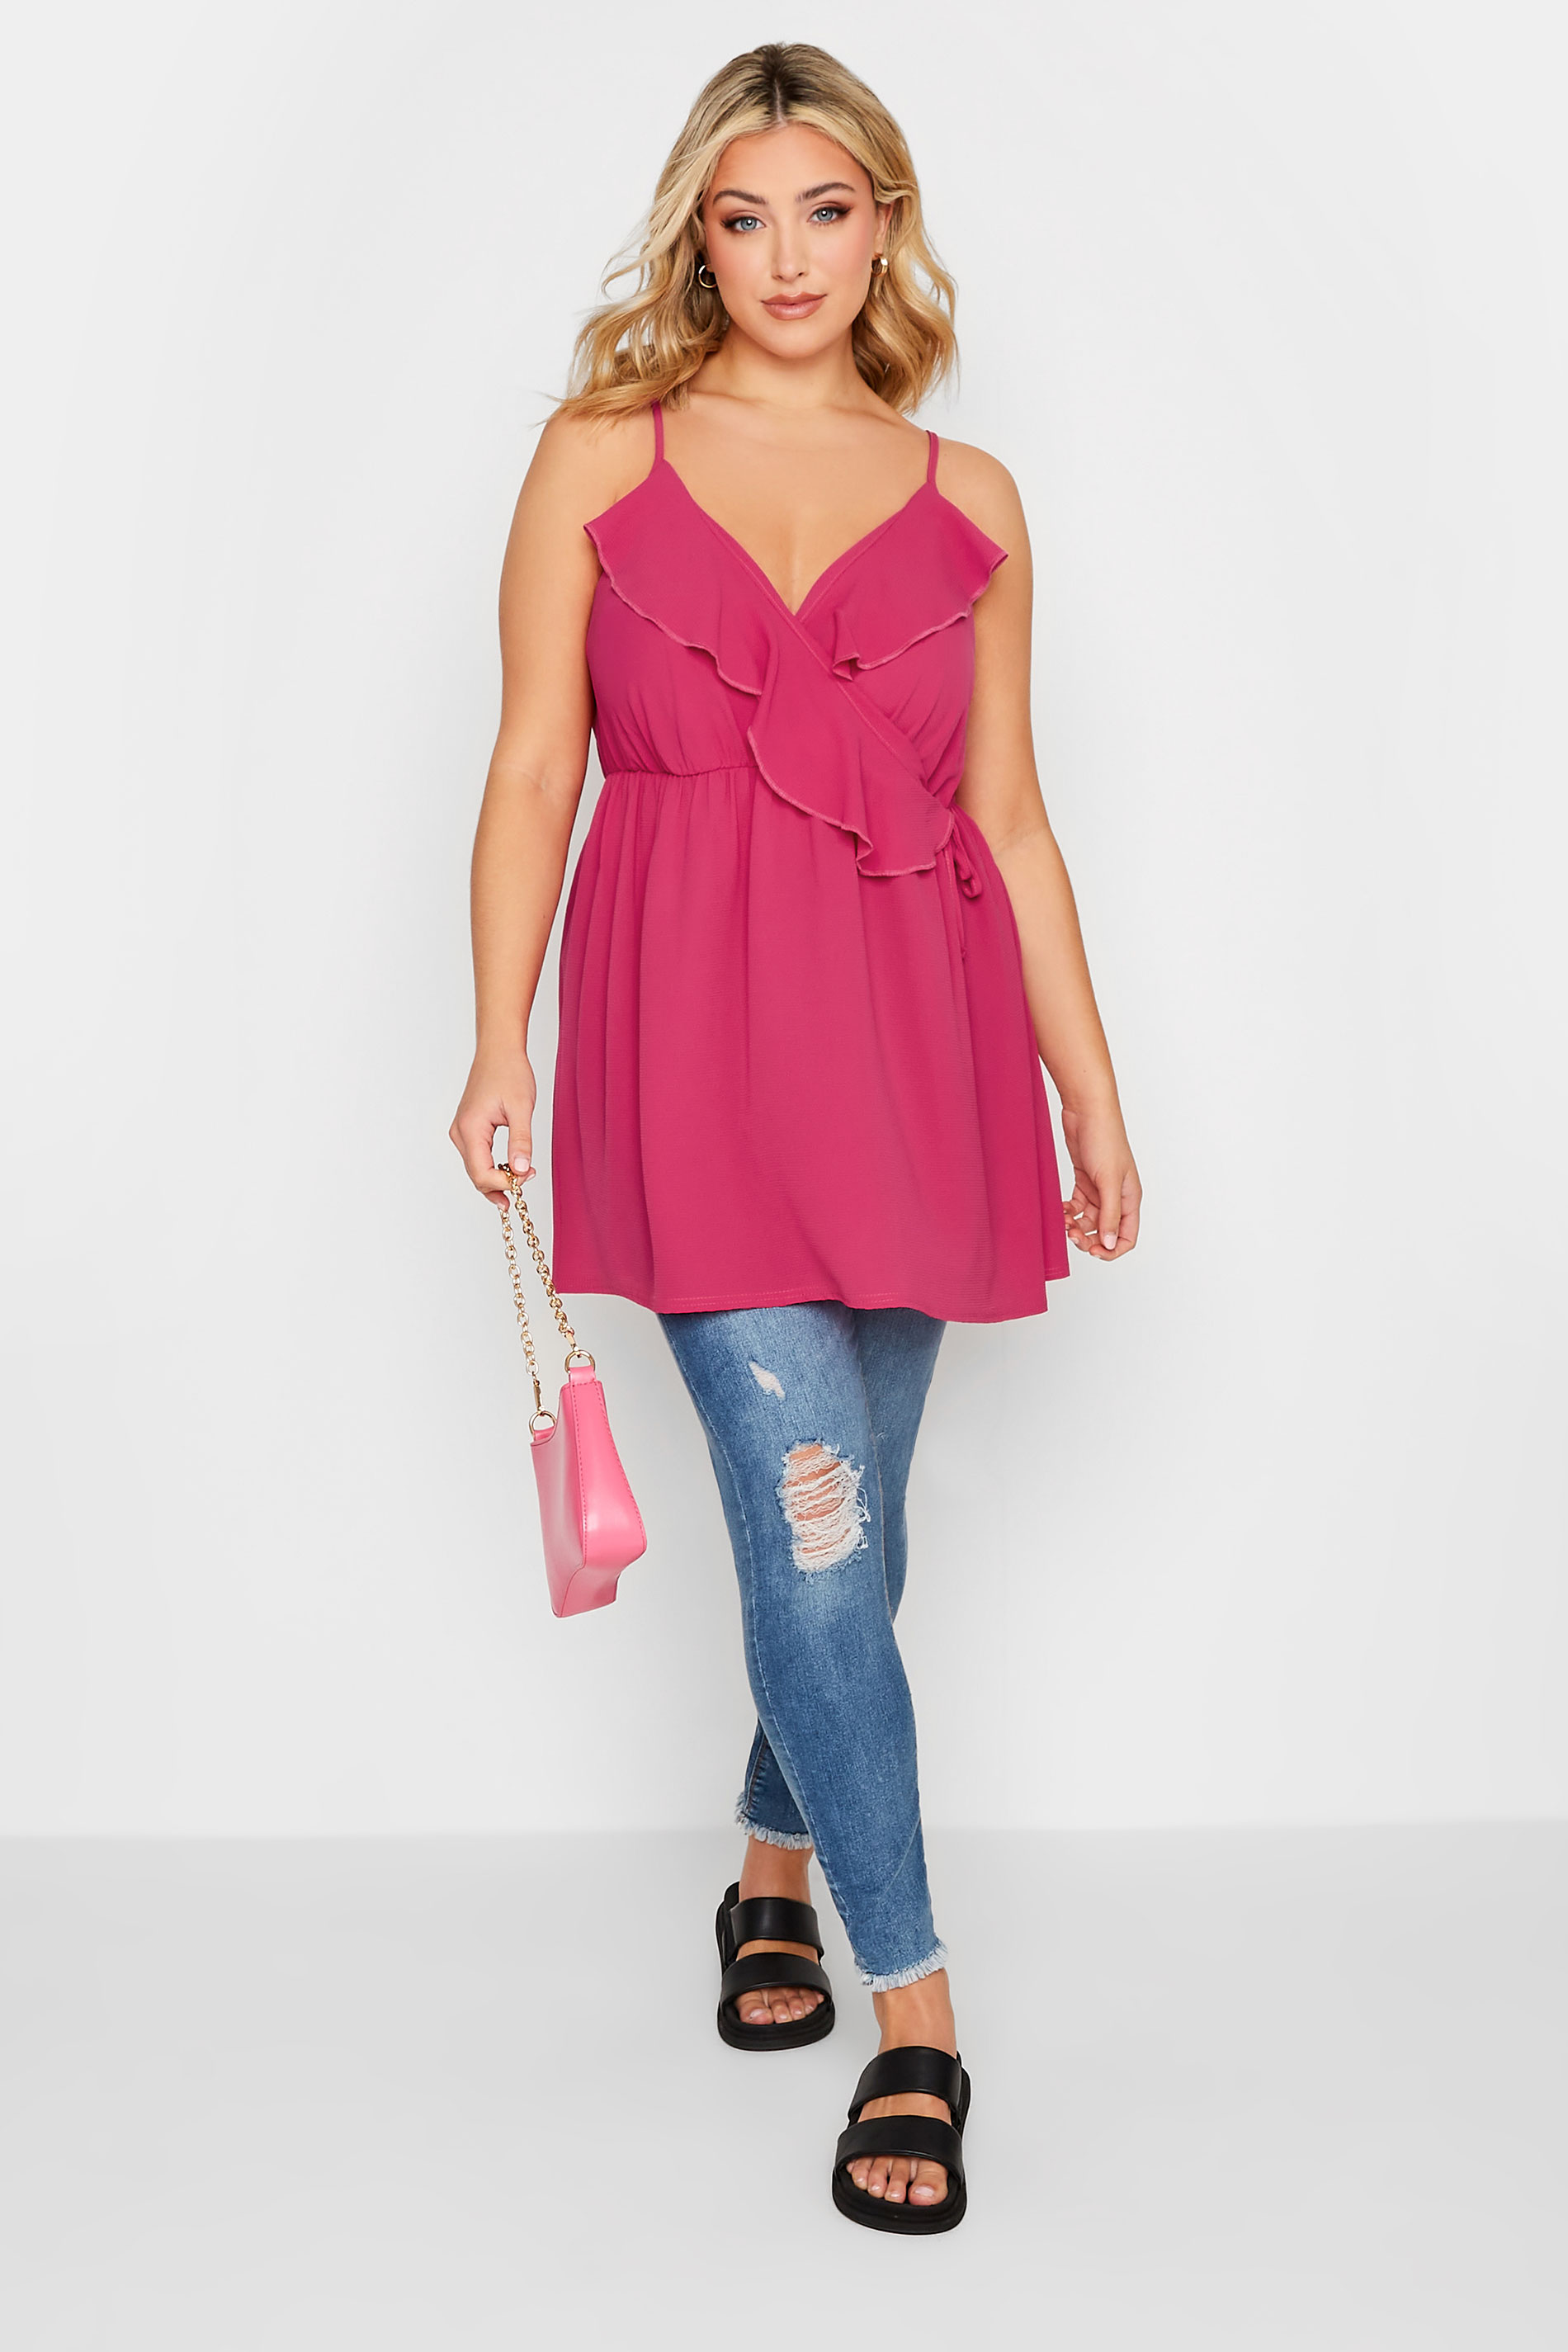 LIMITED COLLECTION Plus Size Hot Pink Wrap Cami Vest Top | Yours Clothing 2